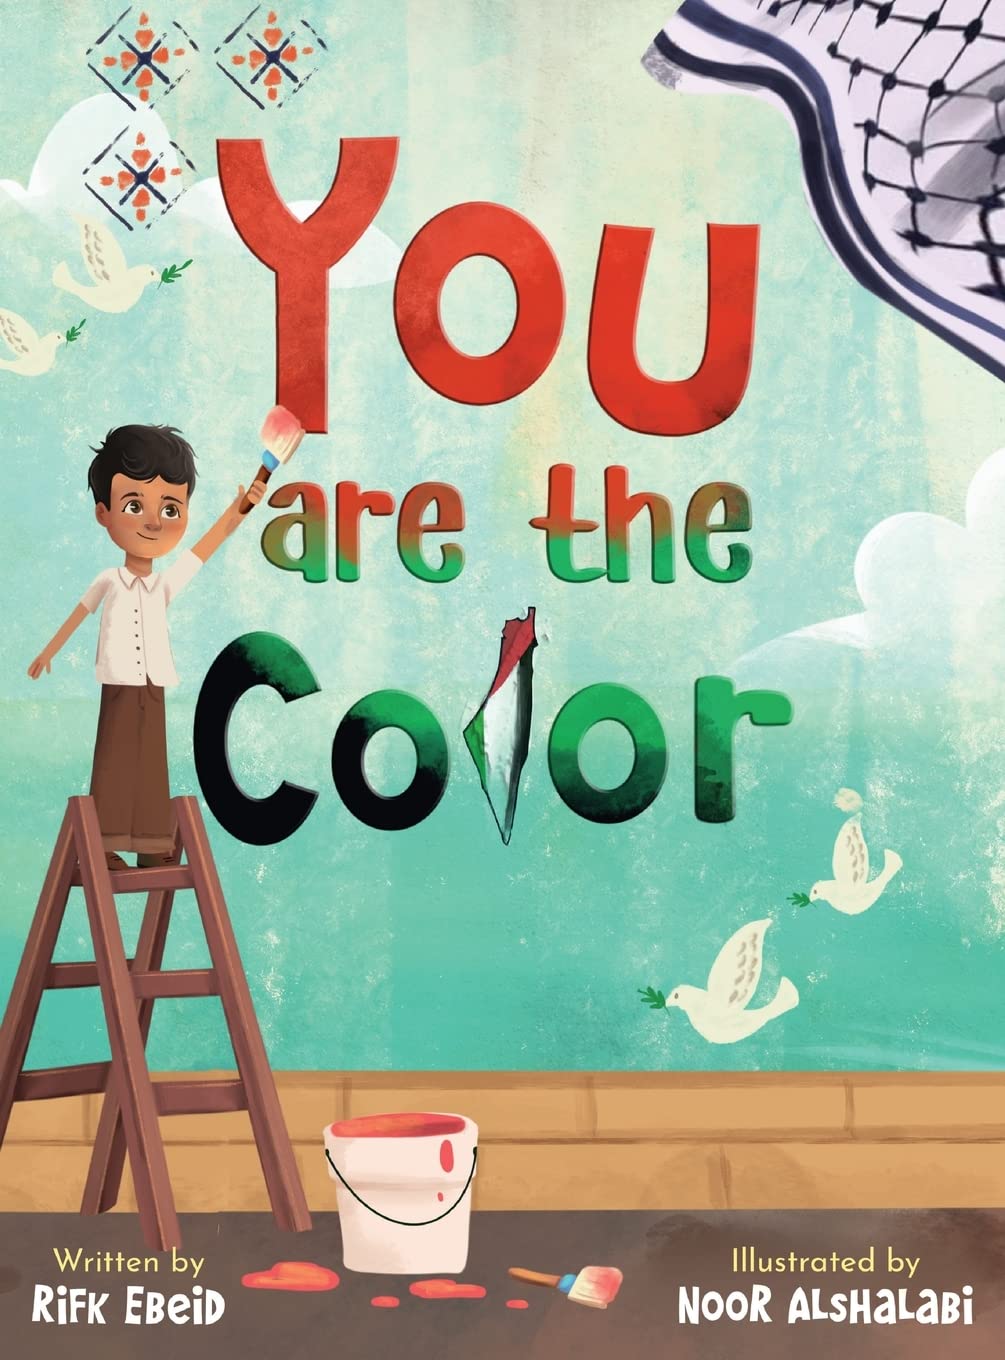 You are the color book cover.